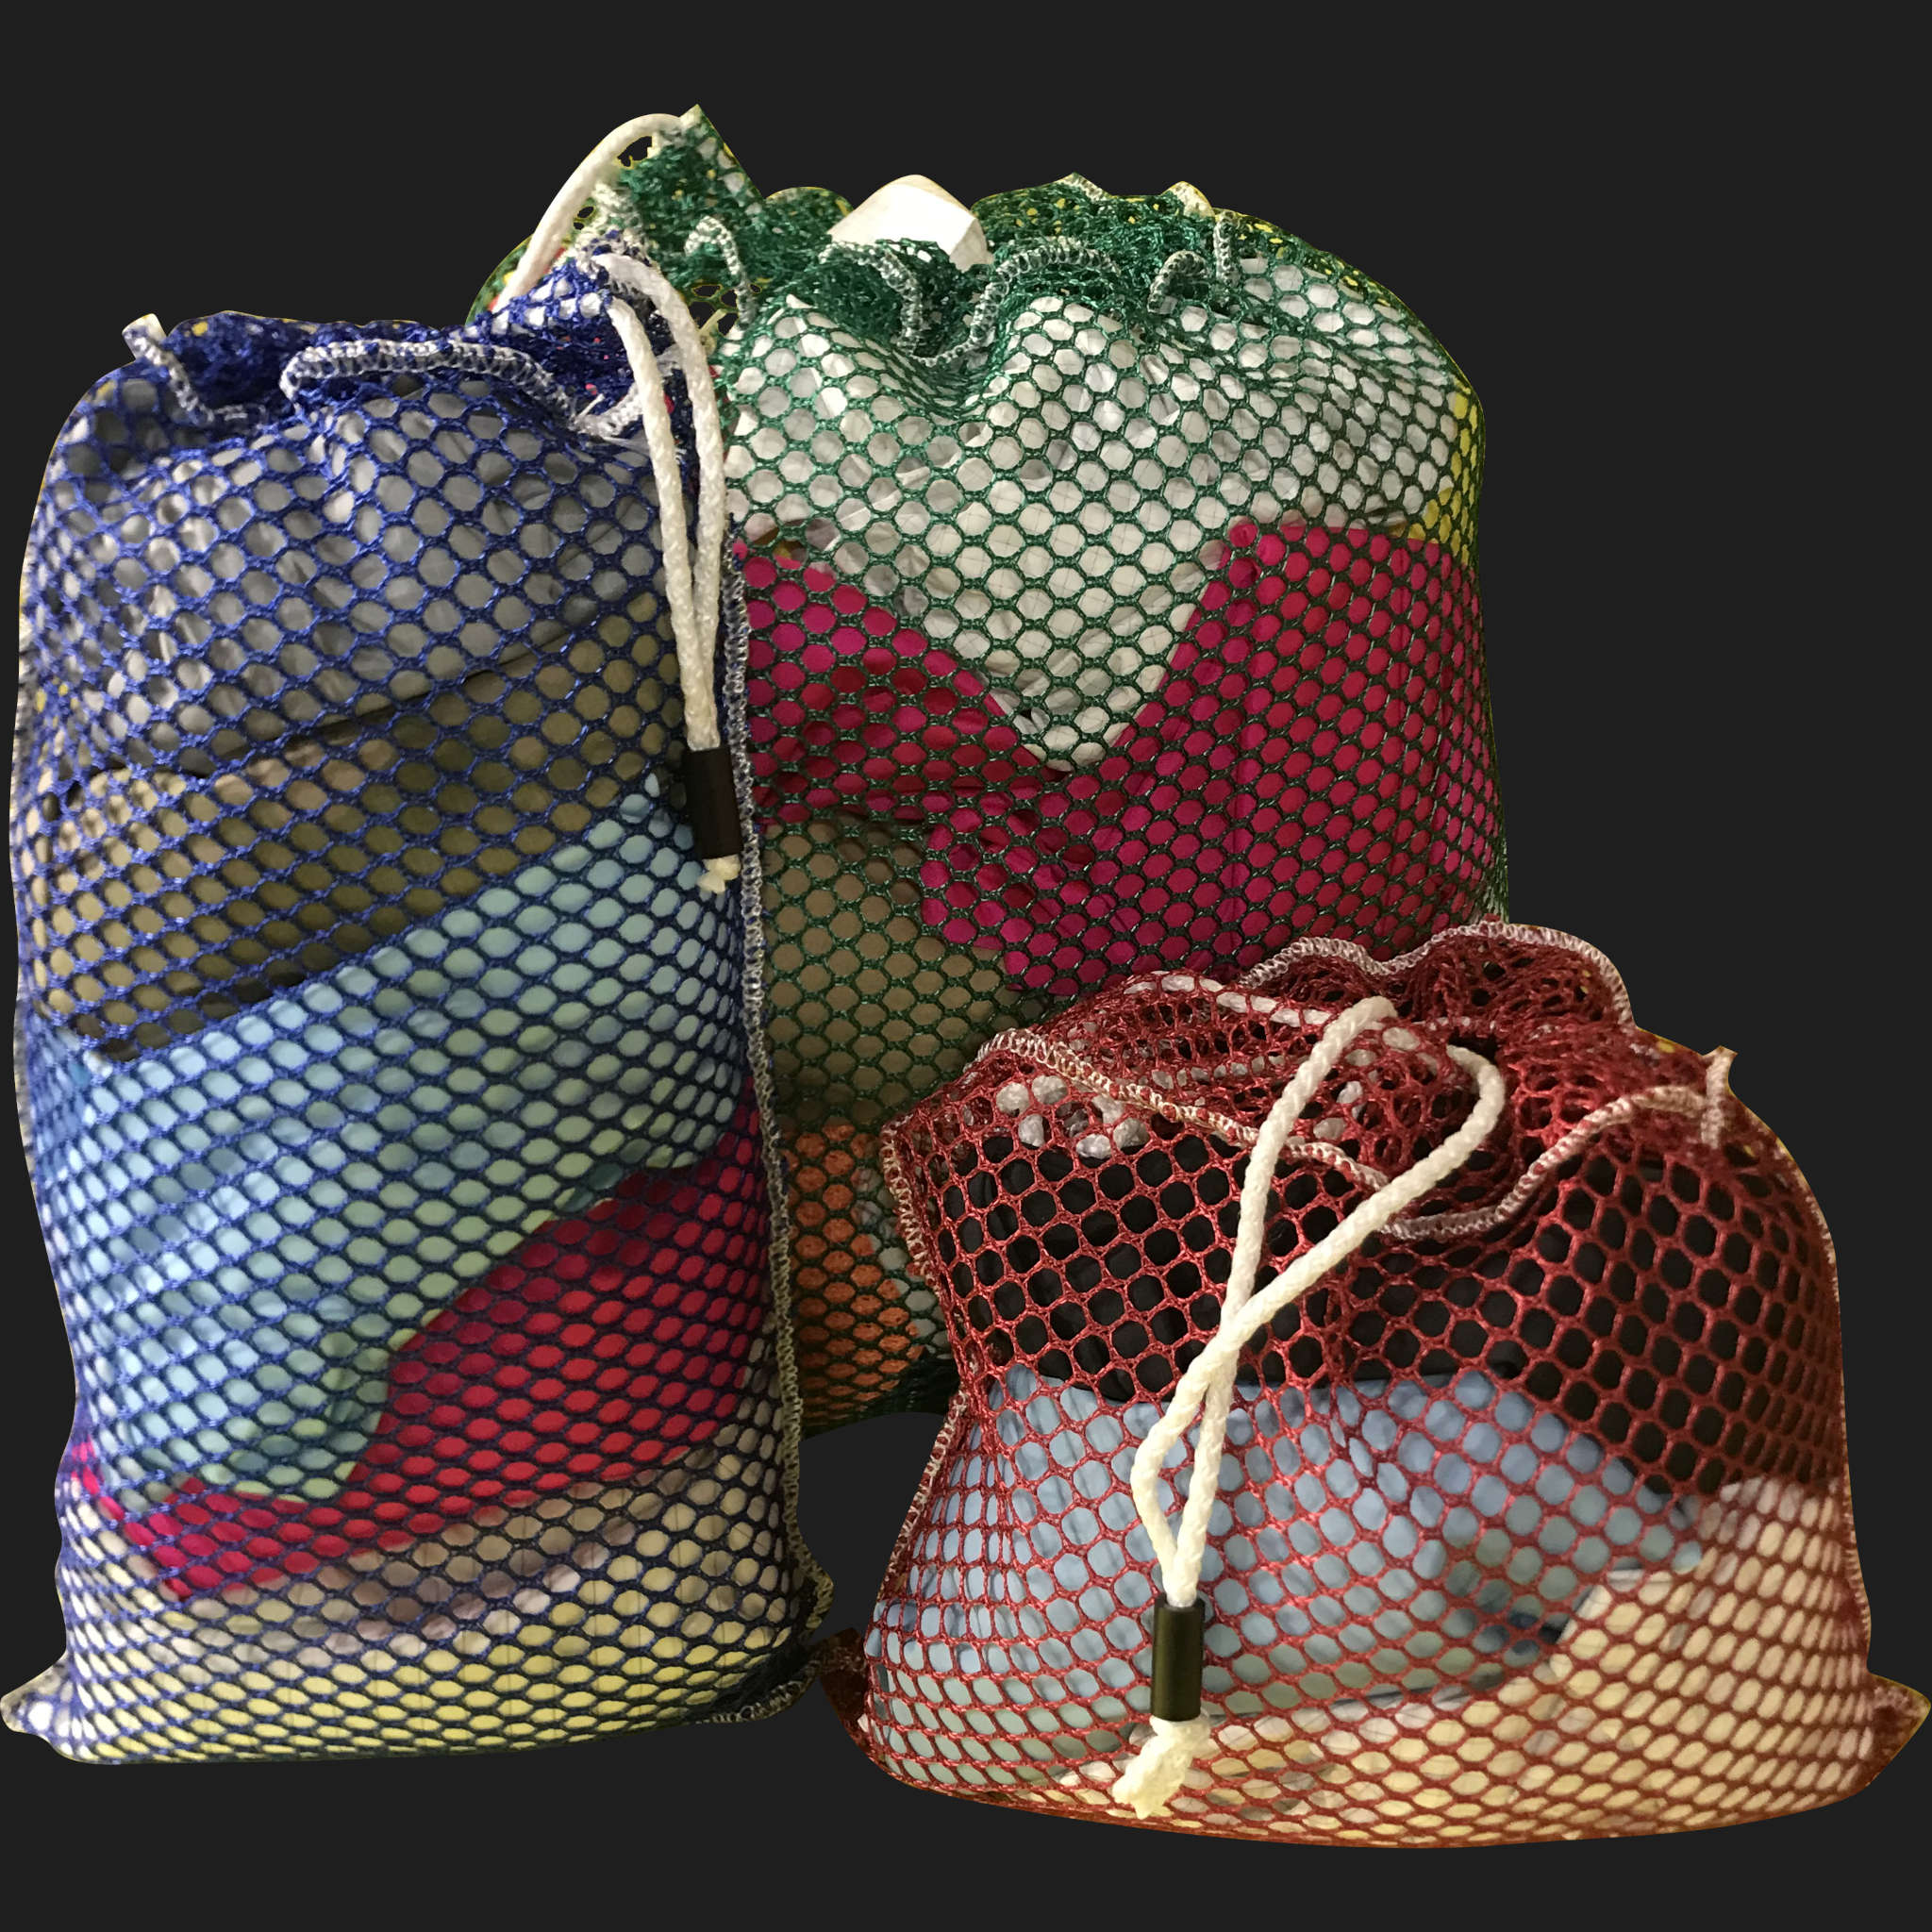 42" x 60" Customized Mesh-Net-Laundry Bags Heavy Duty with Cord and barrellock closure